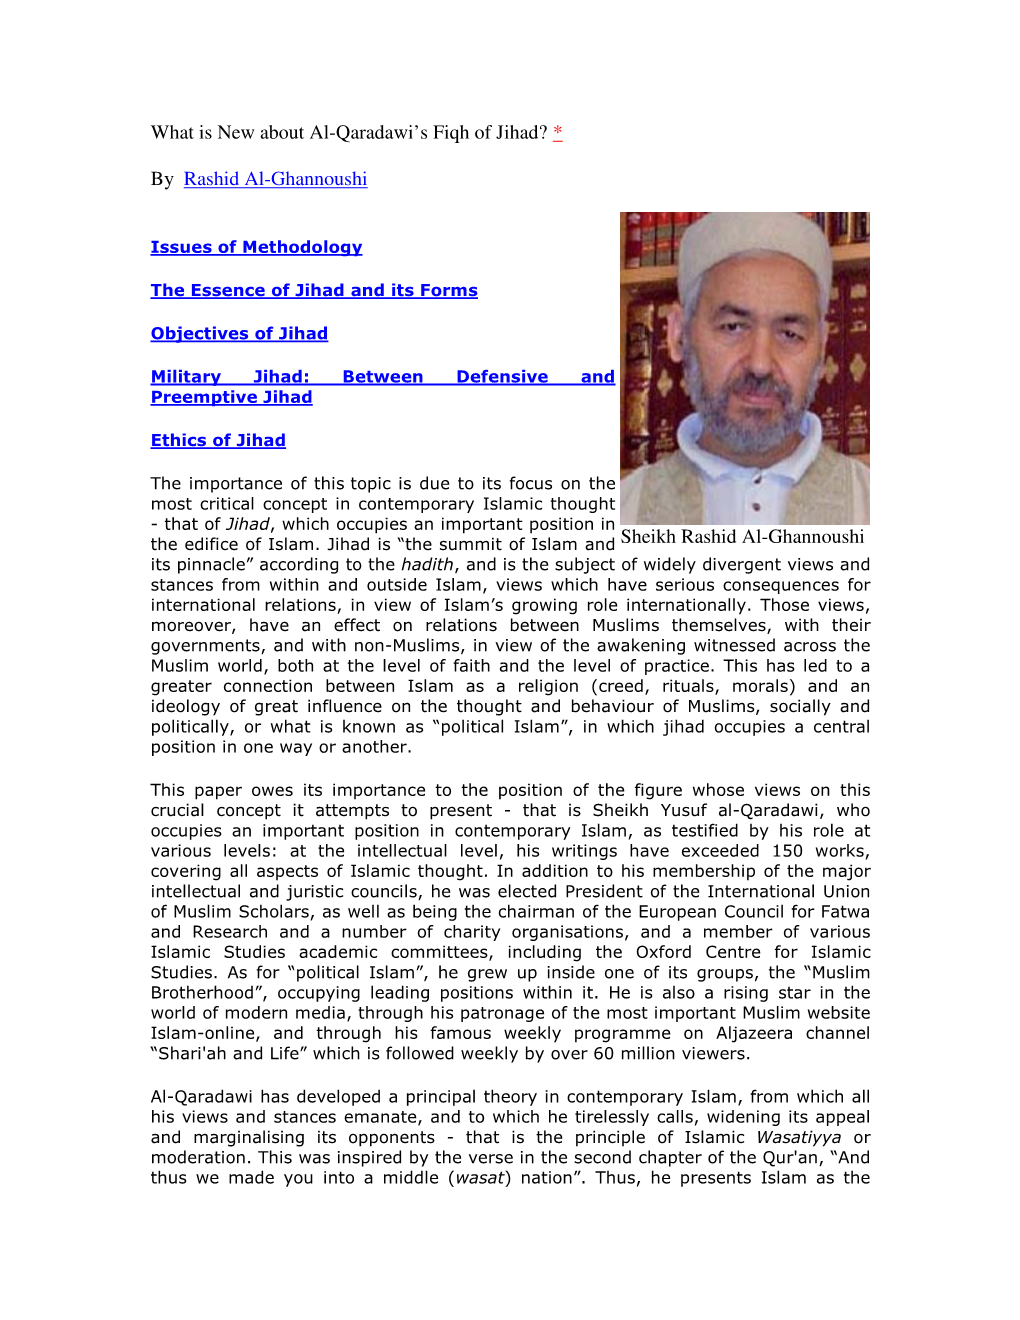 What Is New About Al-Qaradawi's Fiqh of Jihad?